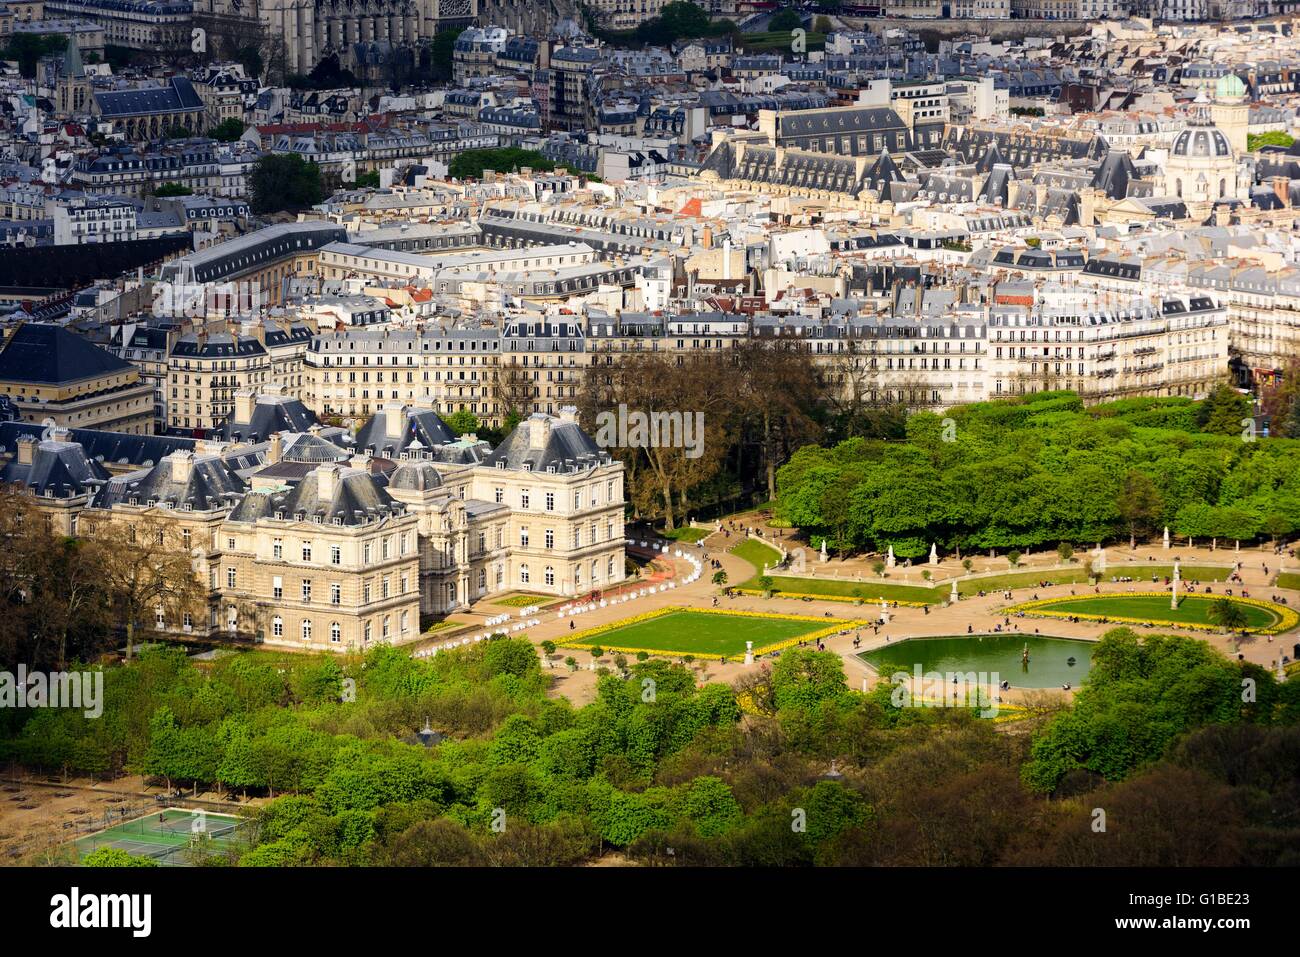 France, Paris, Luxembourg garden seen from Montparnasse tower (aerial view) Stock Photo